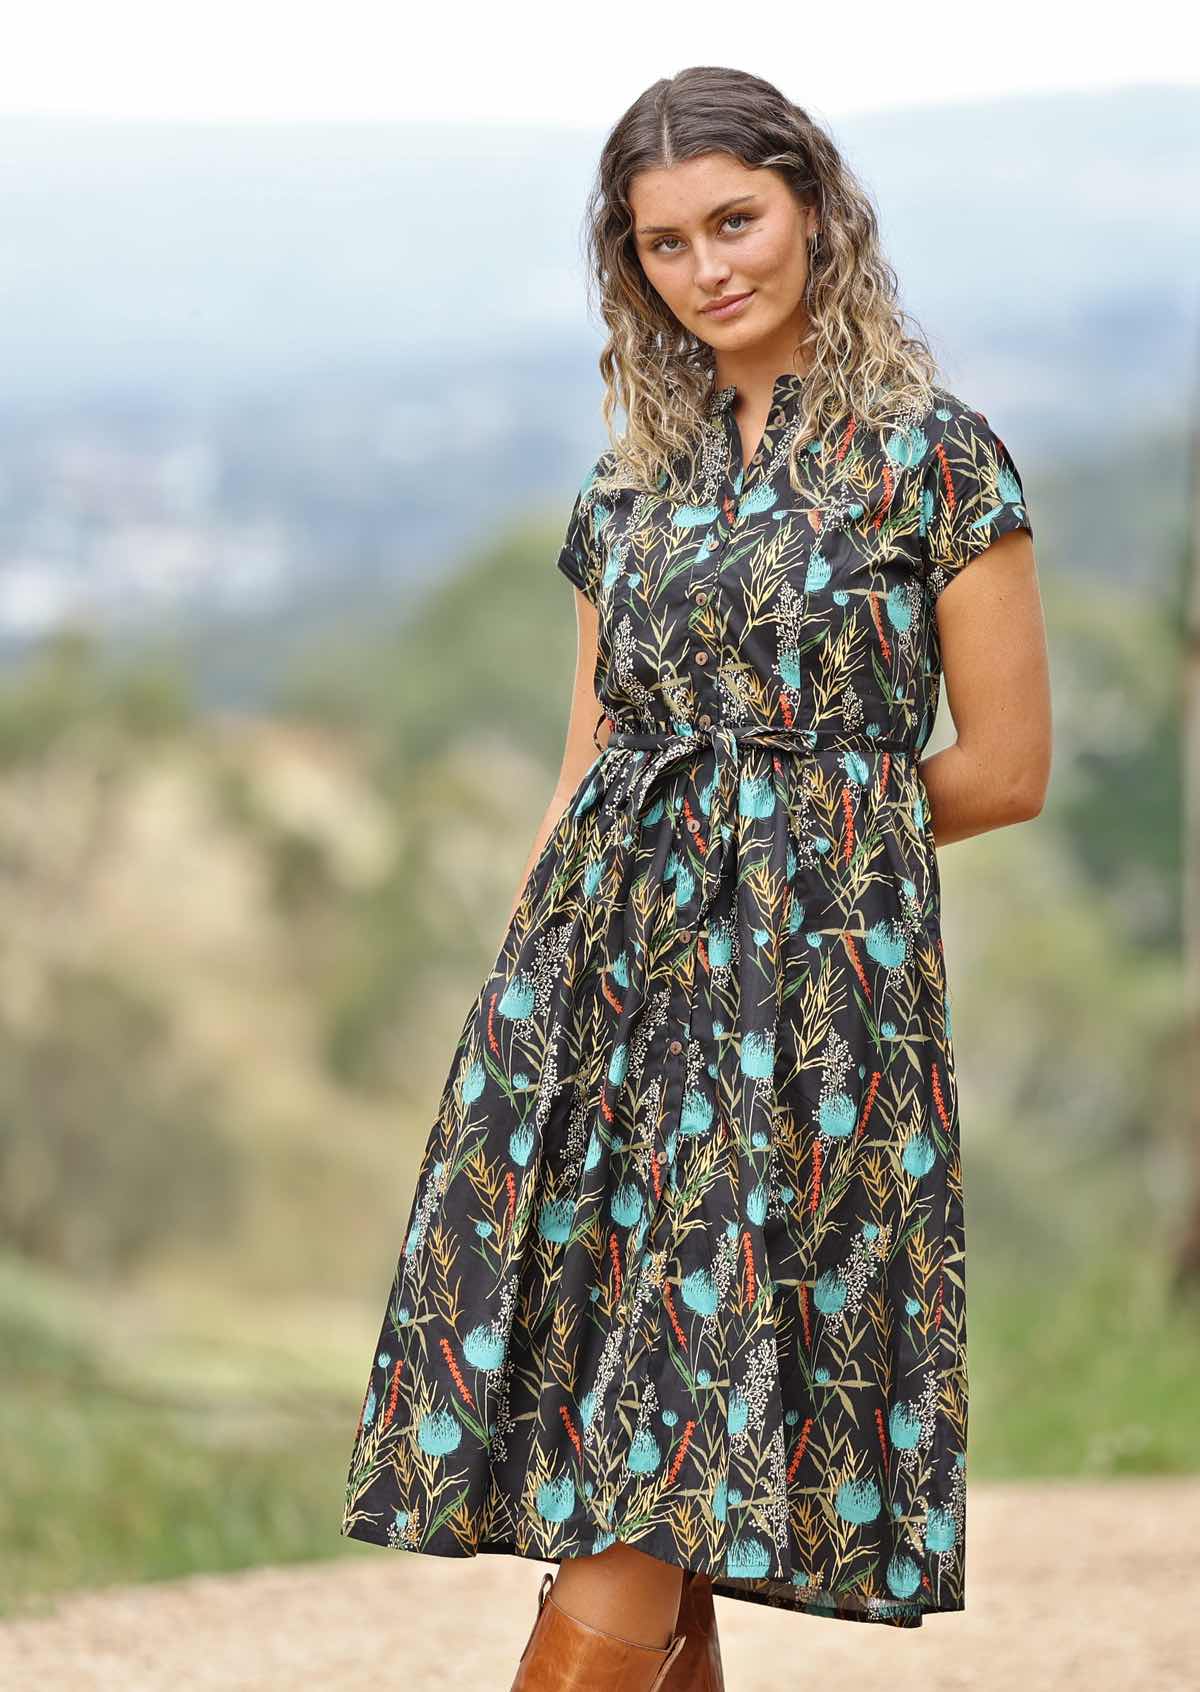 Model on hill wearing black cotton retro dress with teal native floral print